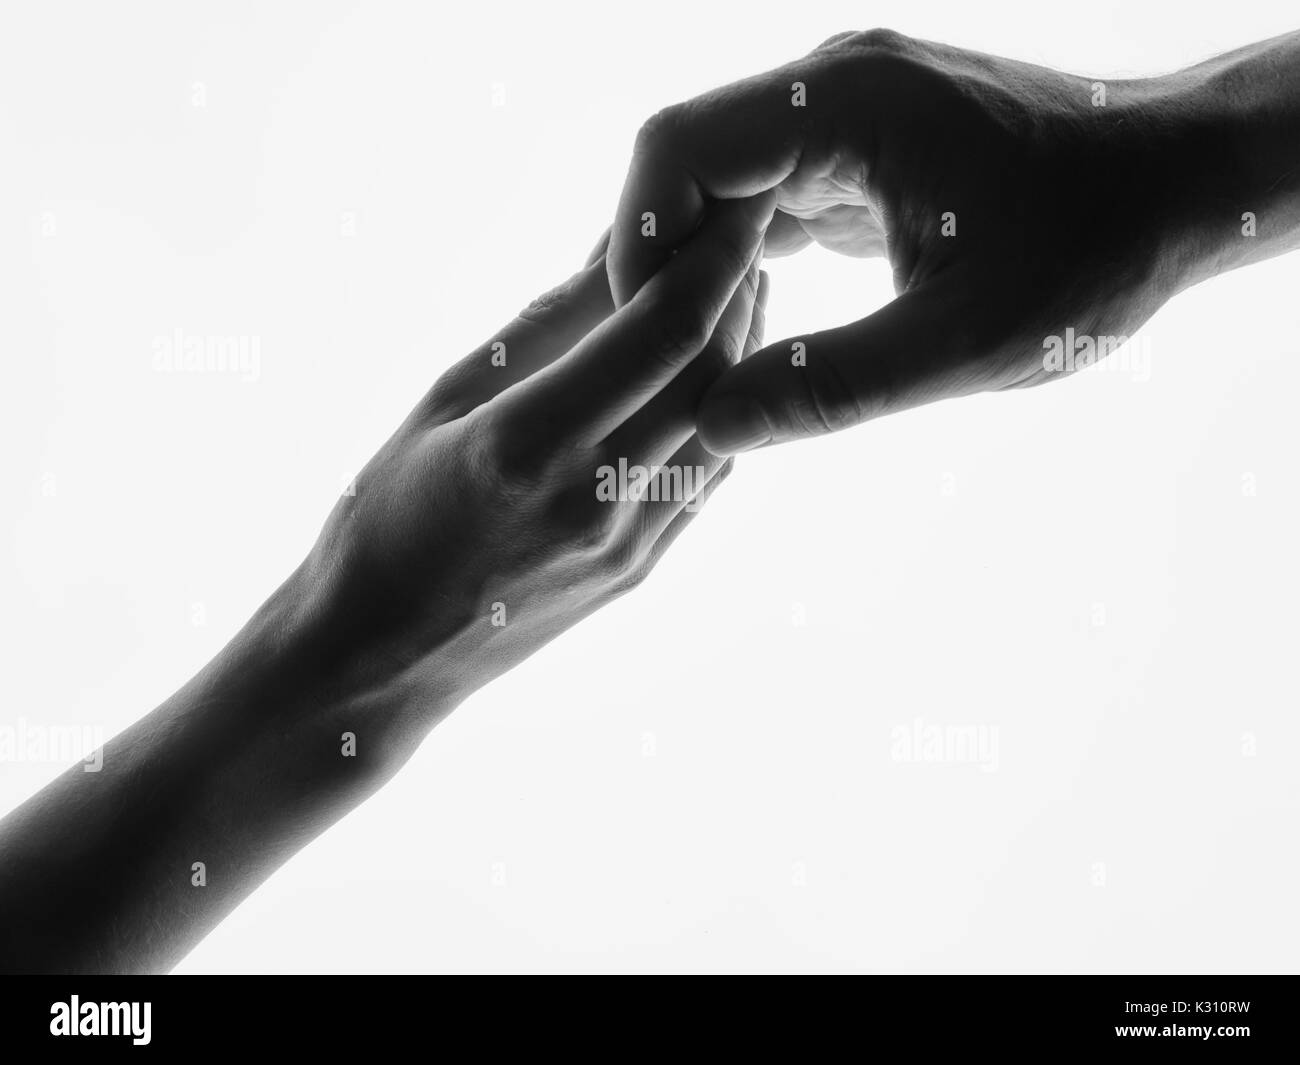 Man woman hold hands silhouette white background. Stock Photo